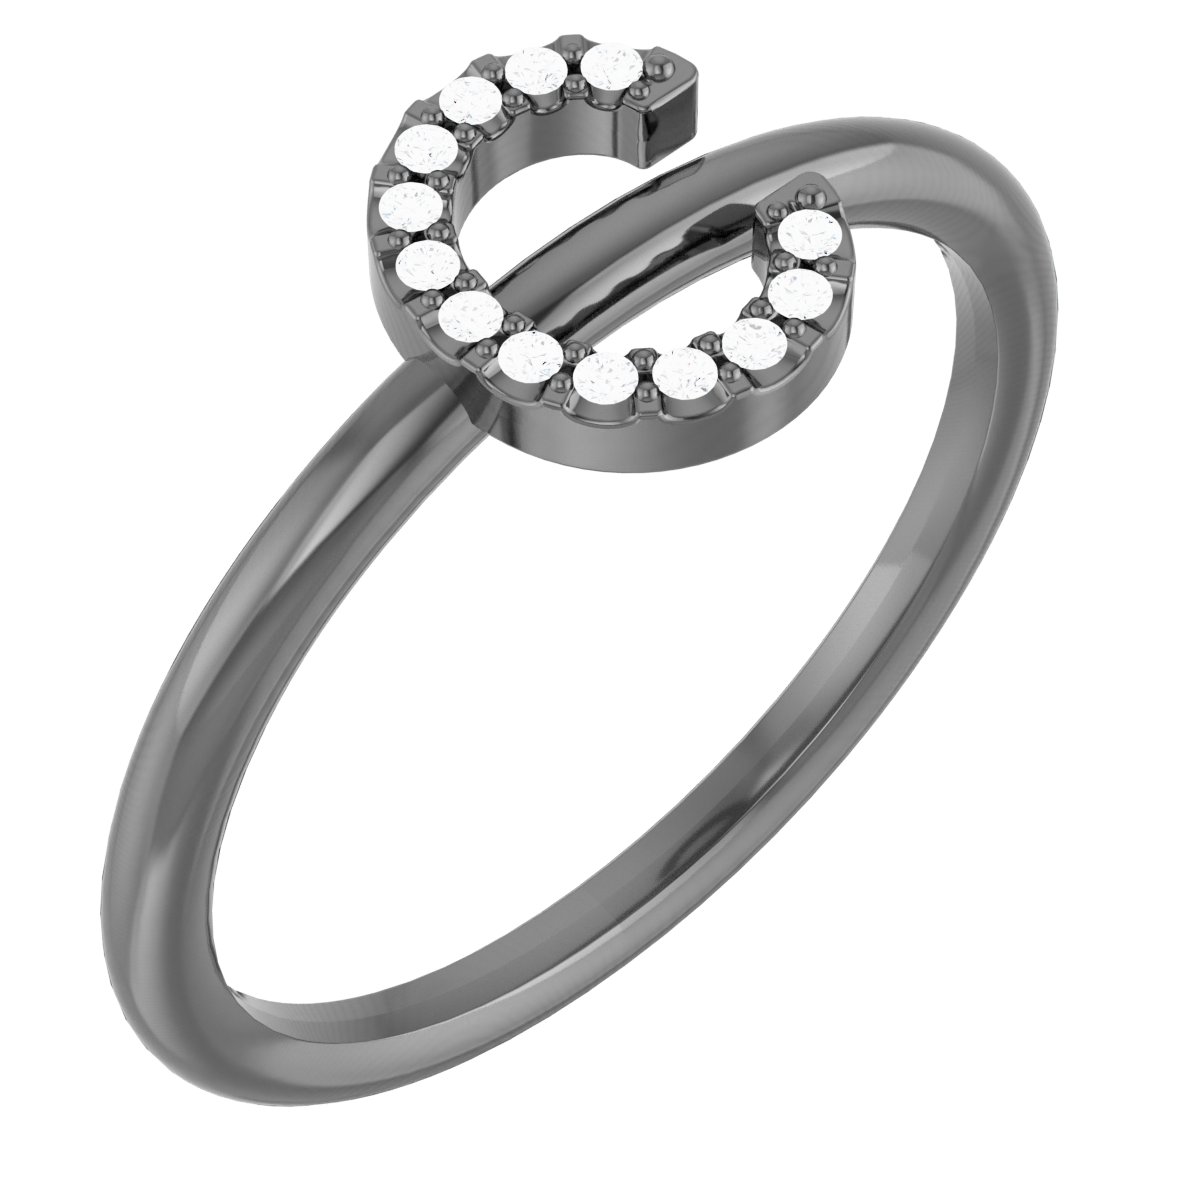 Sterling Silver .07 CTW Diamond Initial C Ring Ref. 15158672